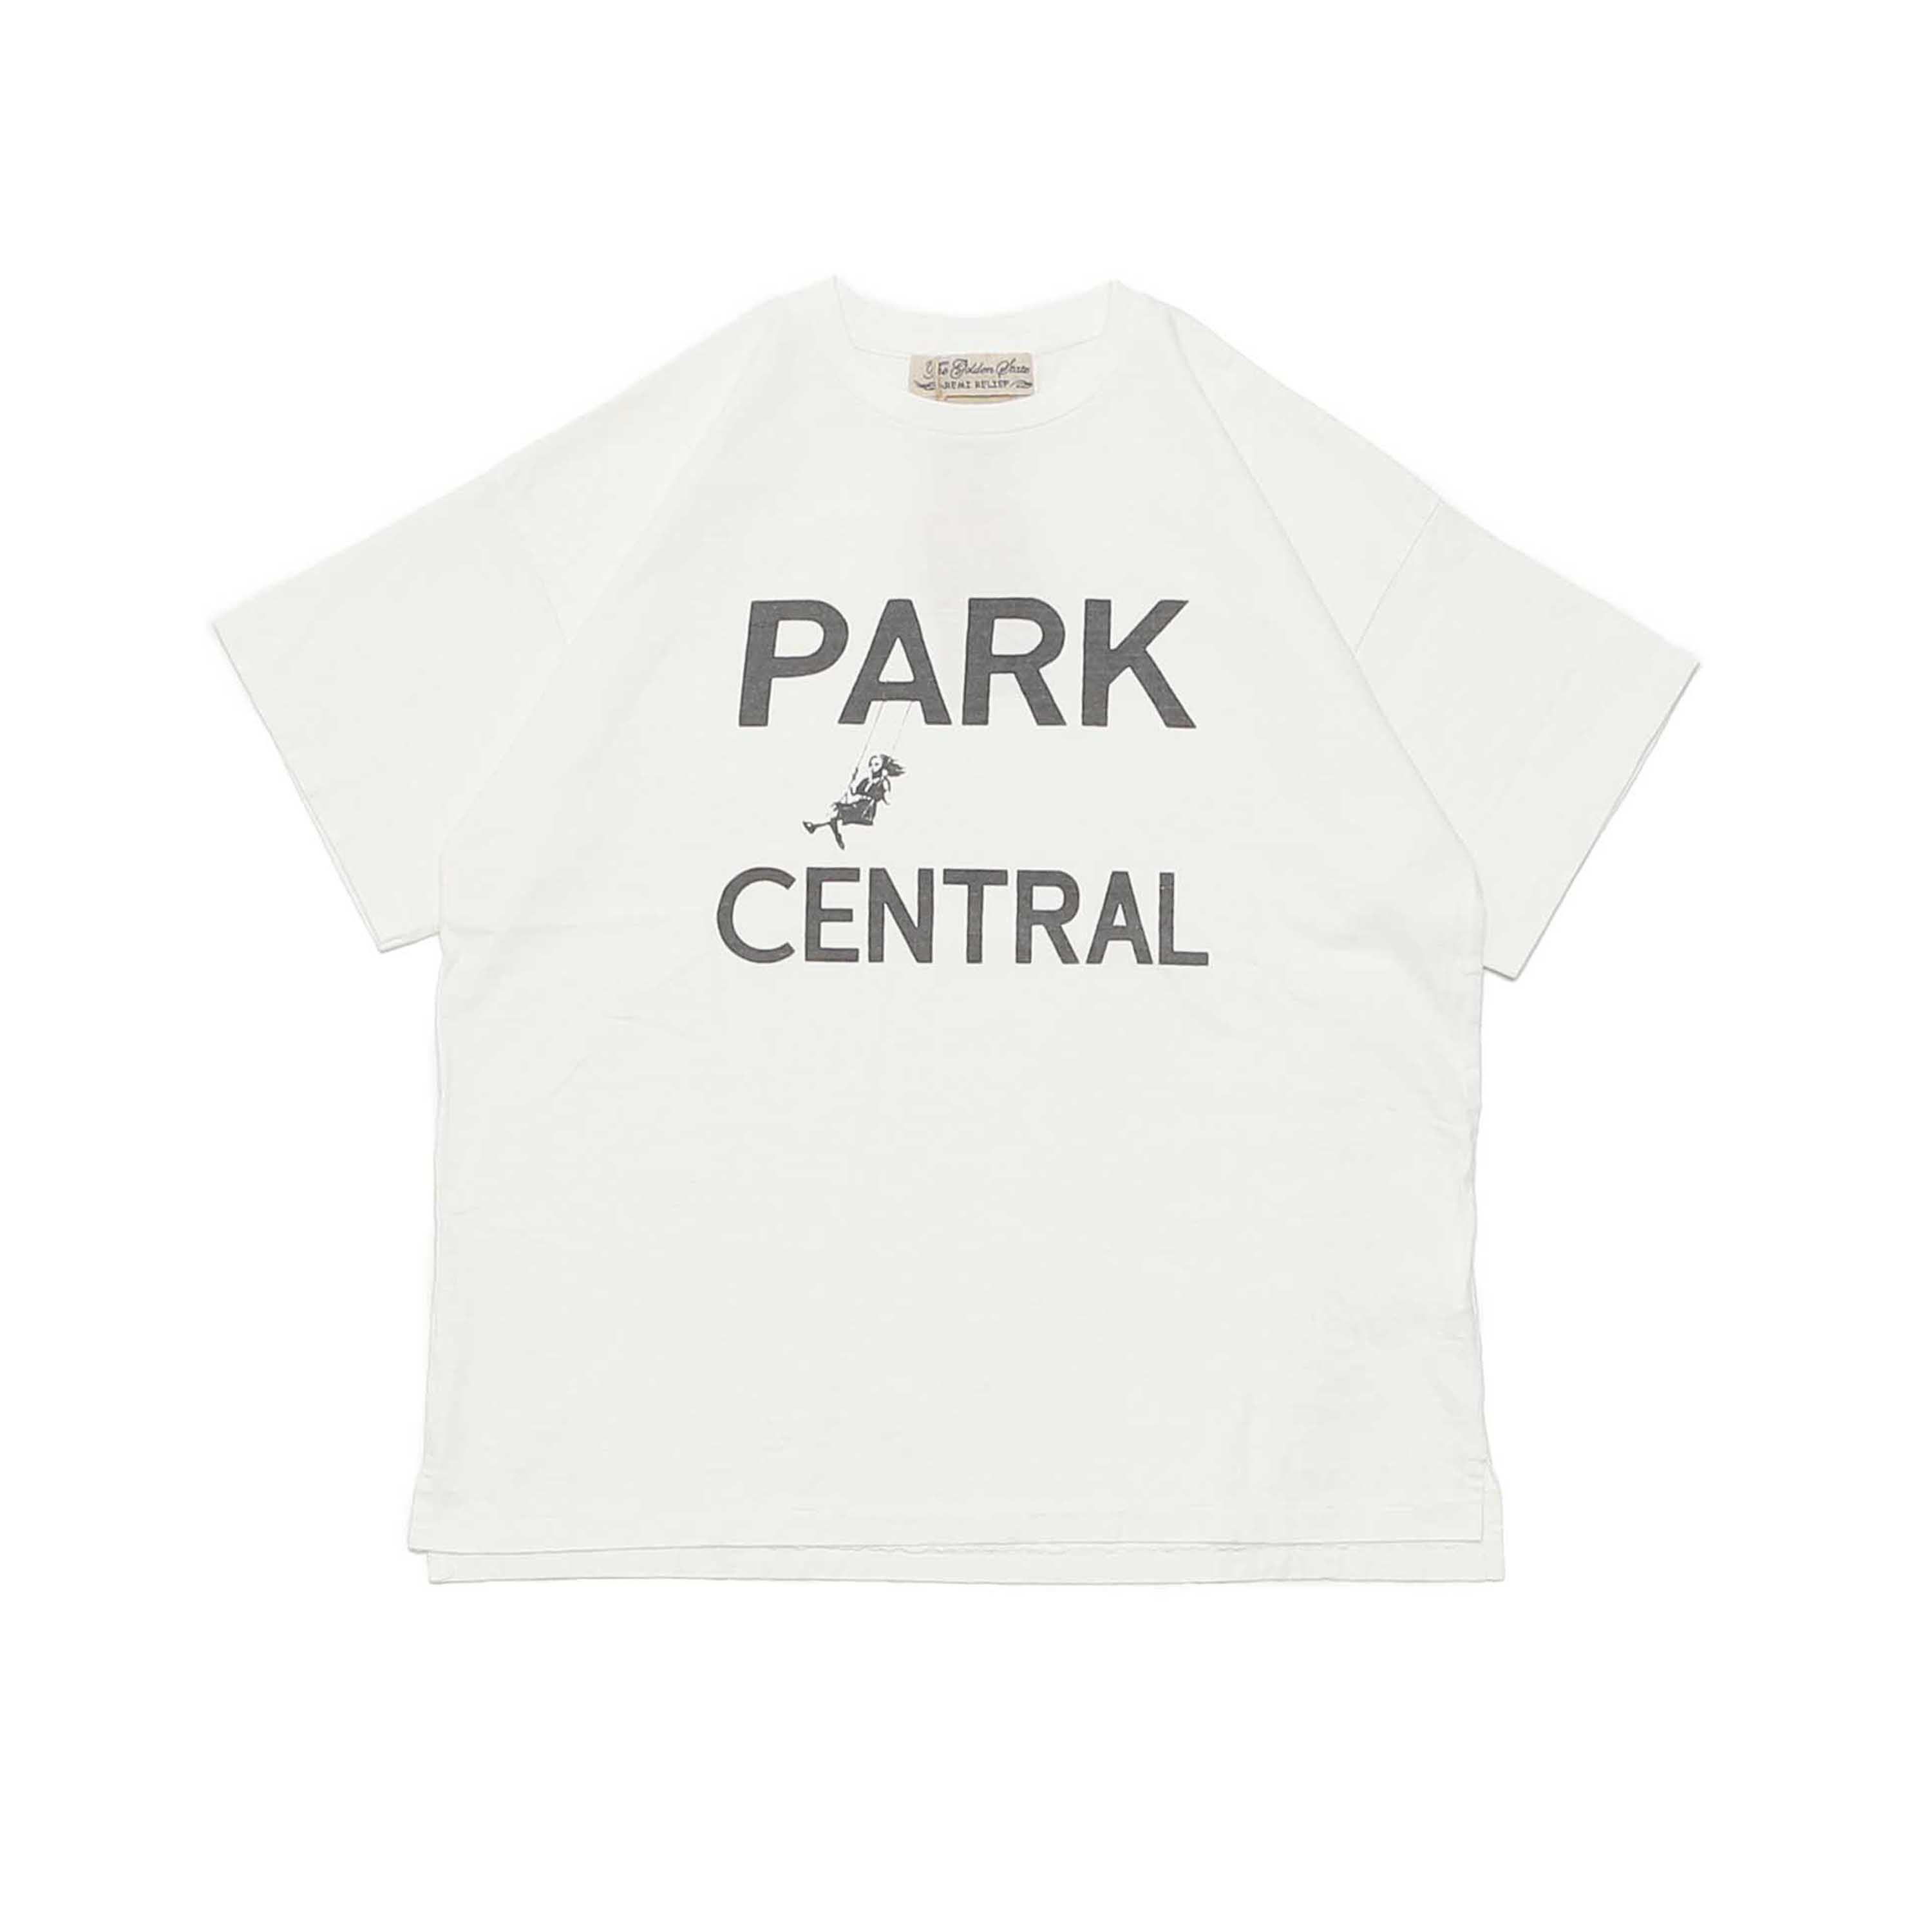 16 JERSEY S/S TEE - PARK CENTRAL OFF